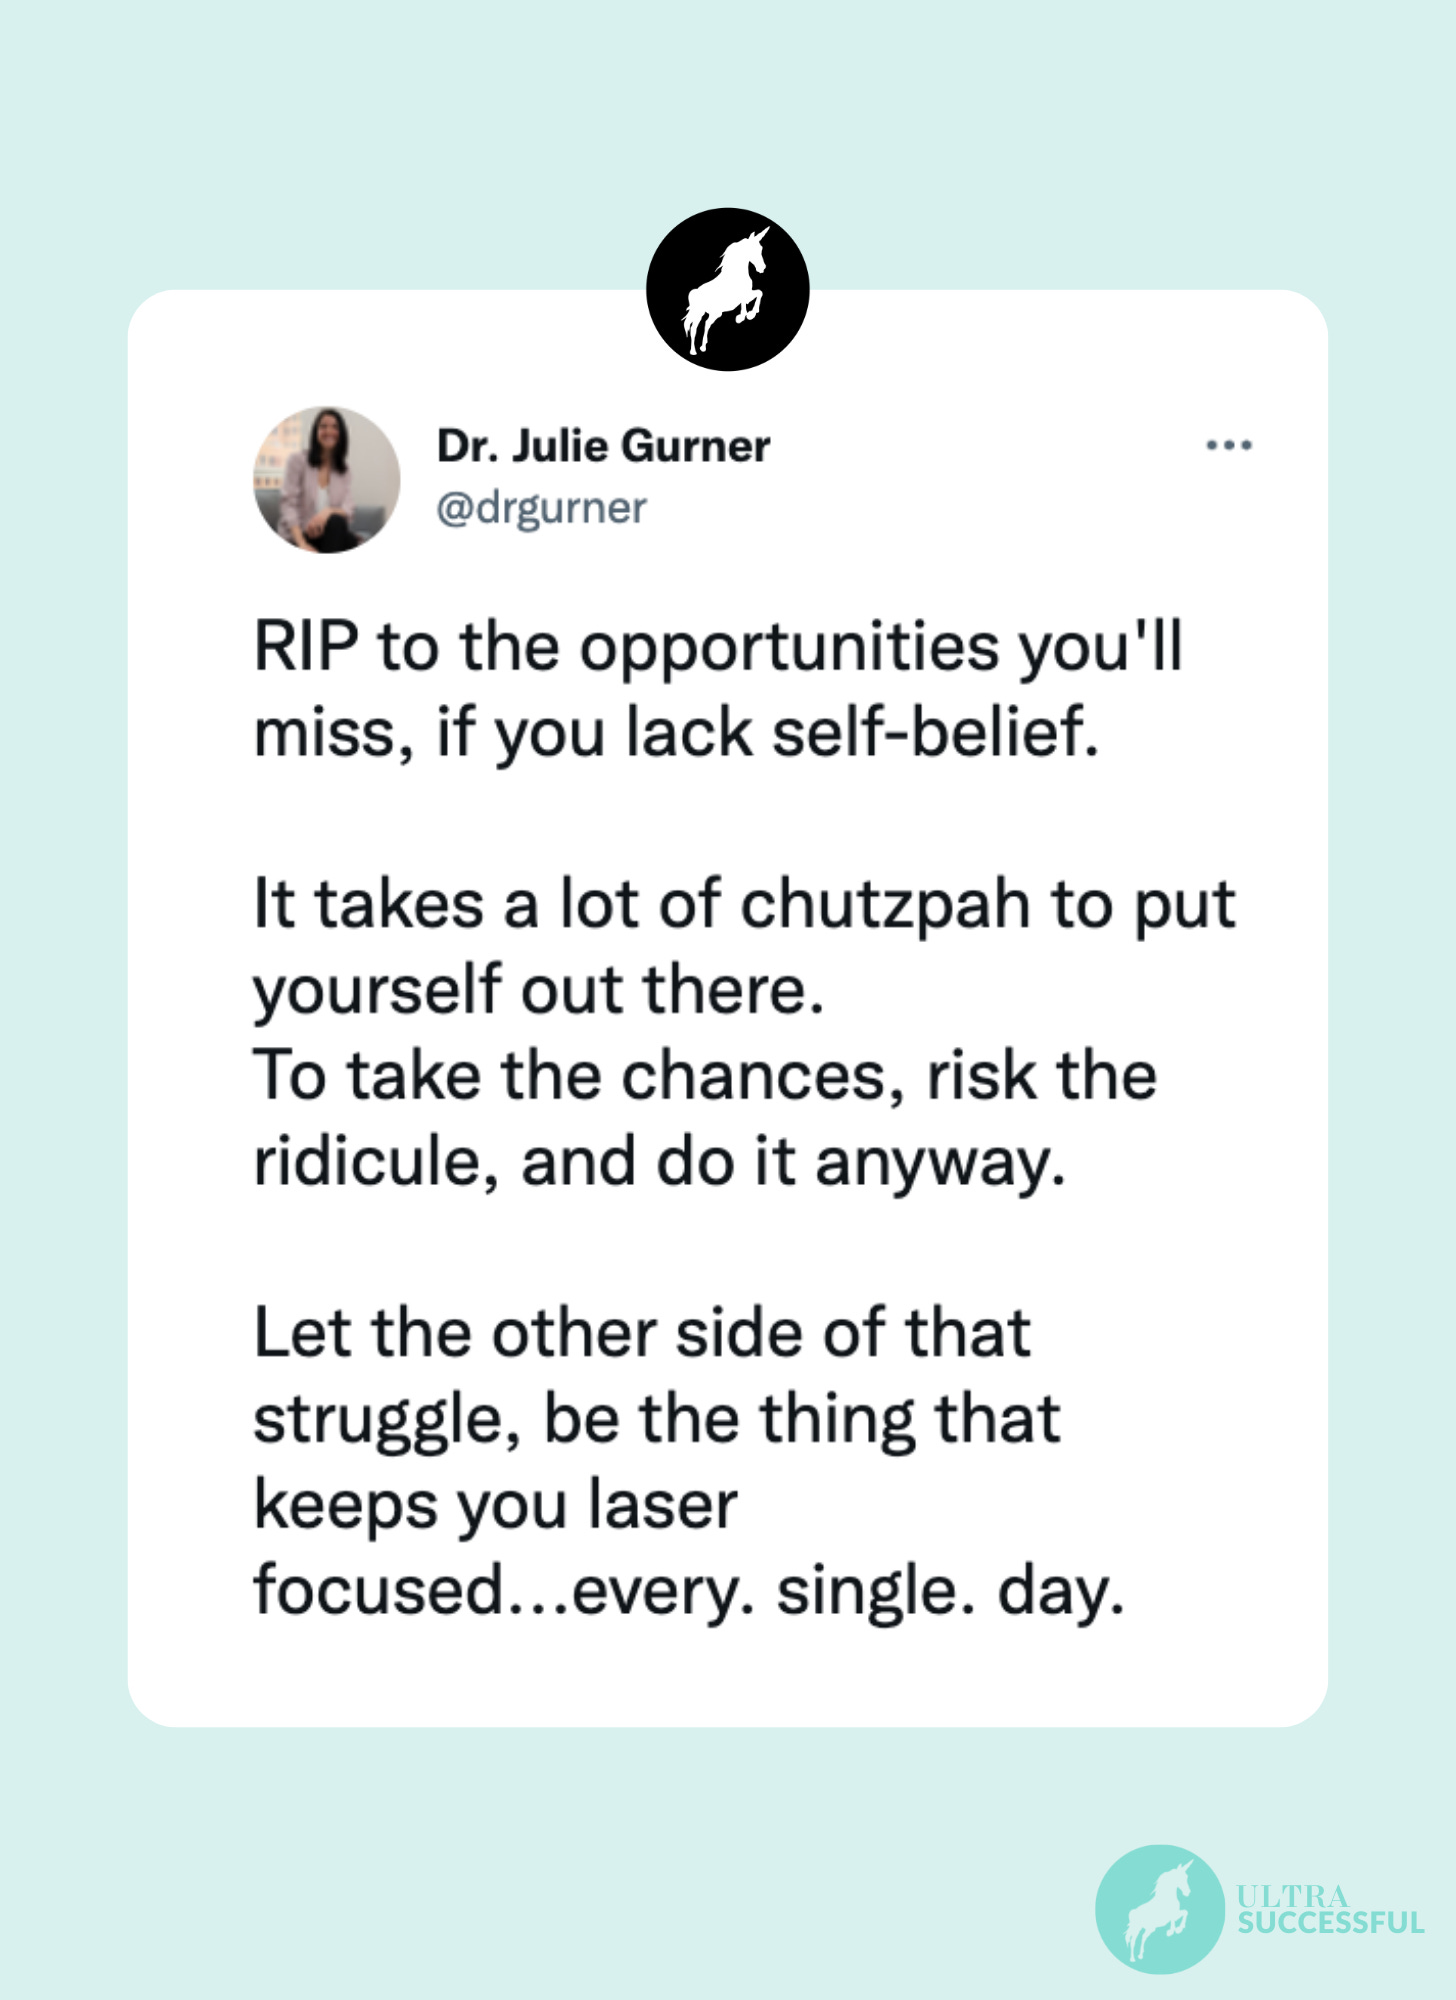 @drgurner: RIP to the opportunities you'll miss, if you lack self-belief.   It takes a lot of chutzpah to put yourself out there.  To take the chances, risk the ridicule, and do it anyway.  Let the other side of that struggle, be the thing that keeps you laser focused...every. single. day.